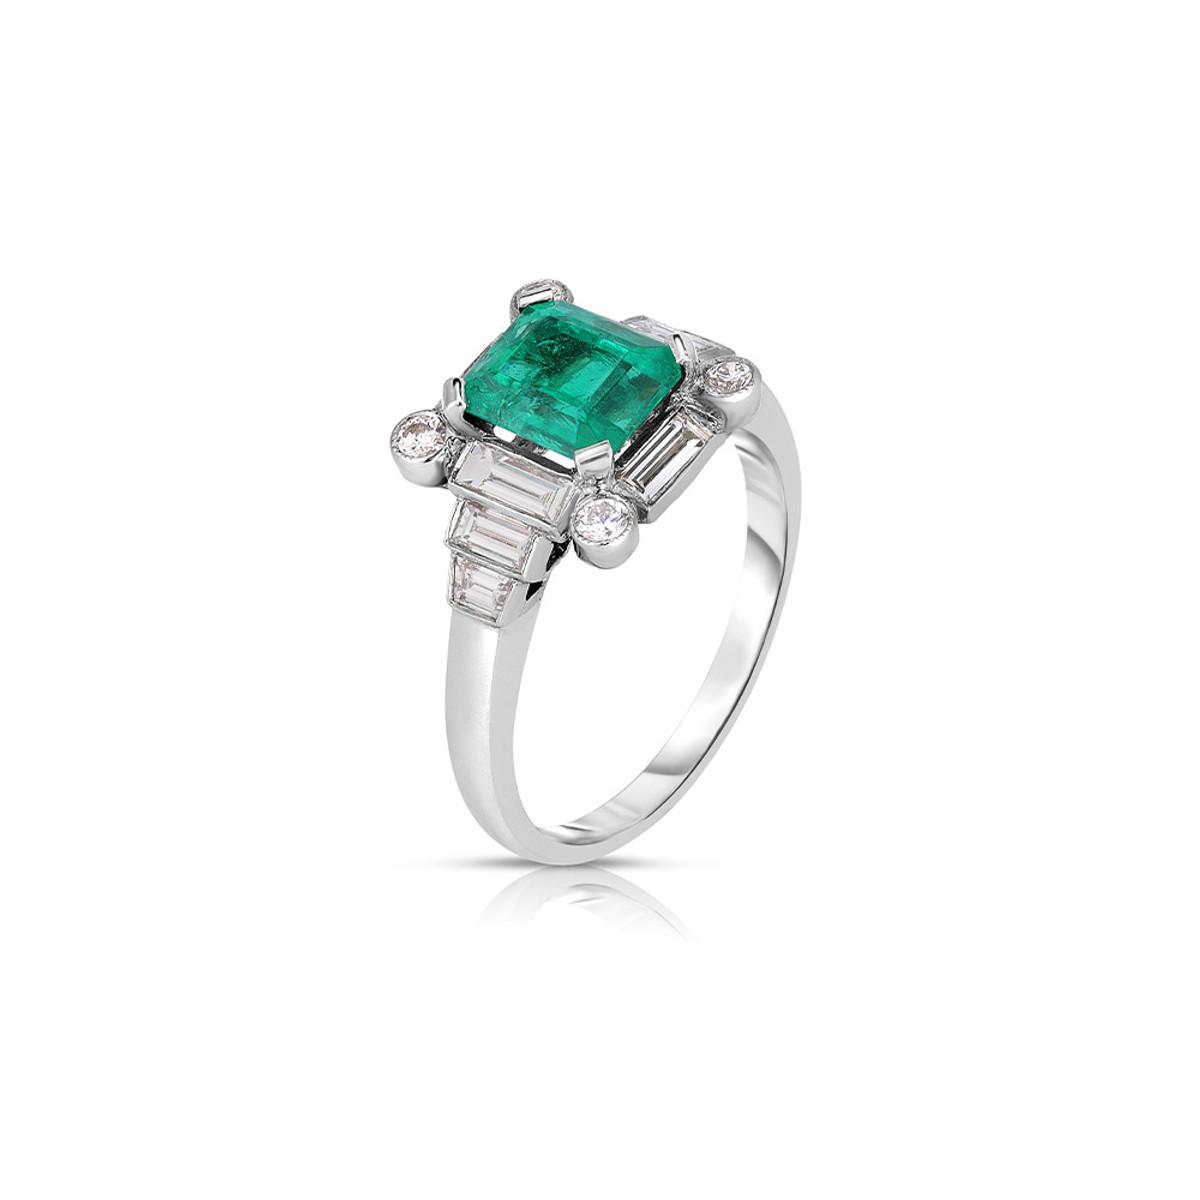 Hyde Park Collection Platinum Emerald and Diamond Ring-61612 Product Image